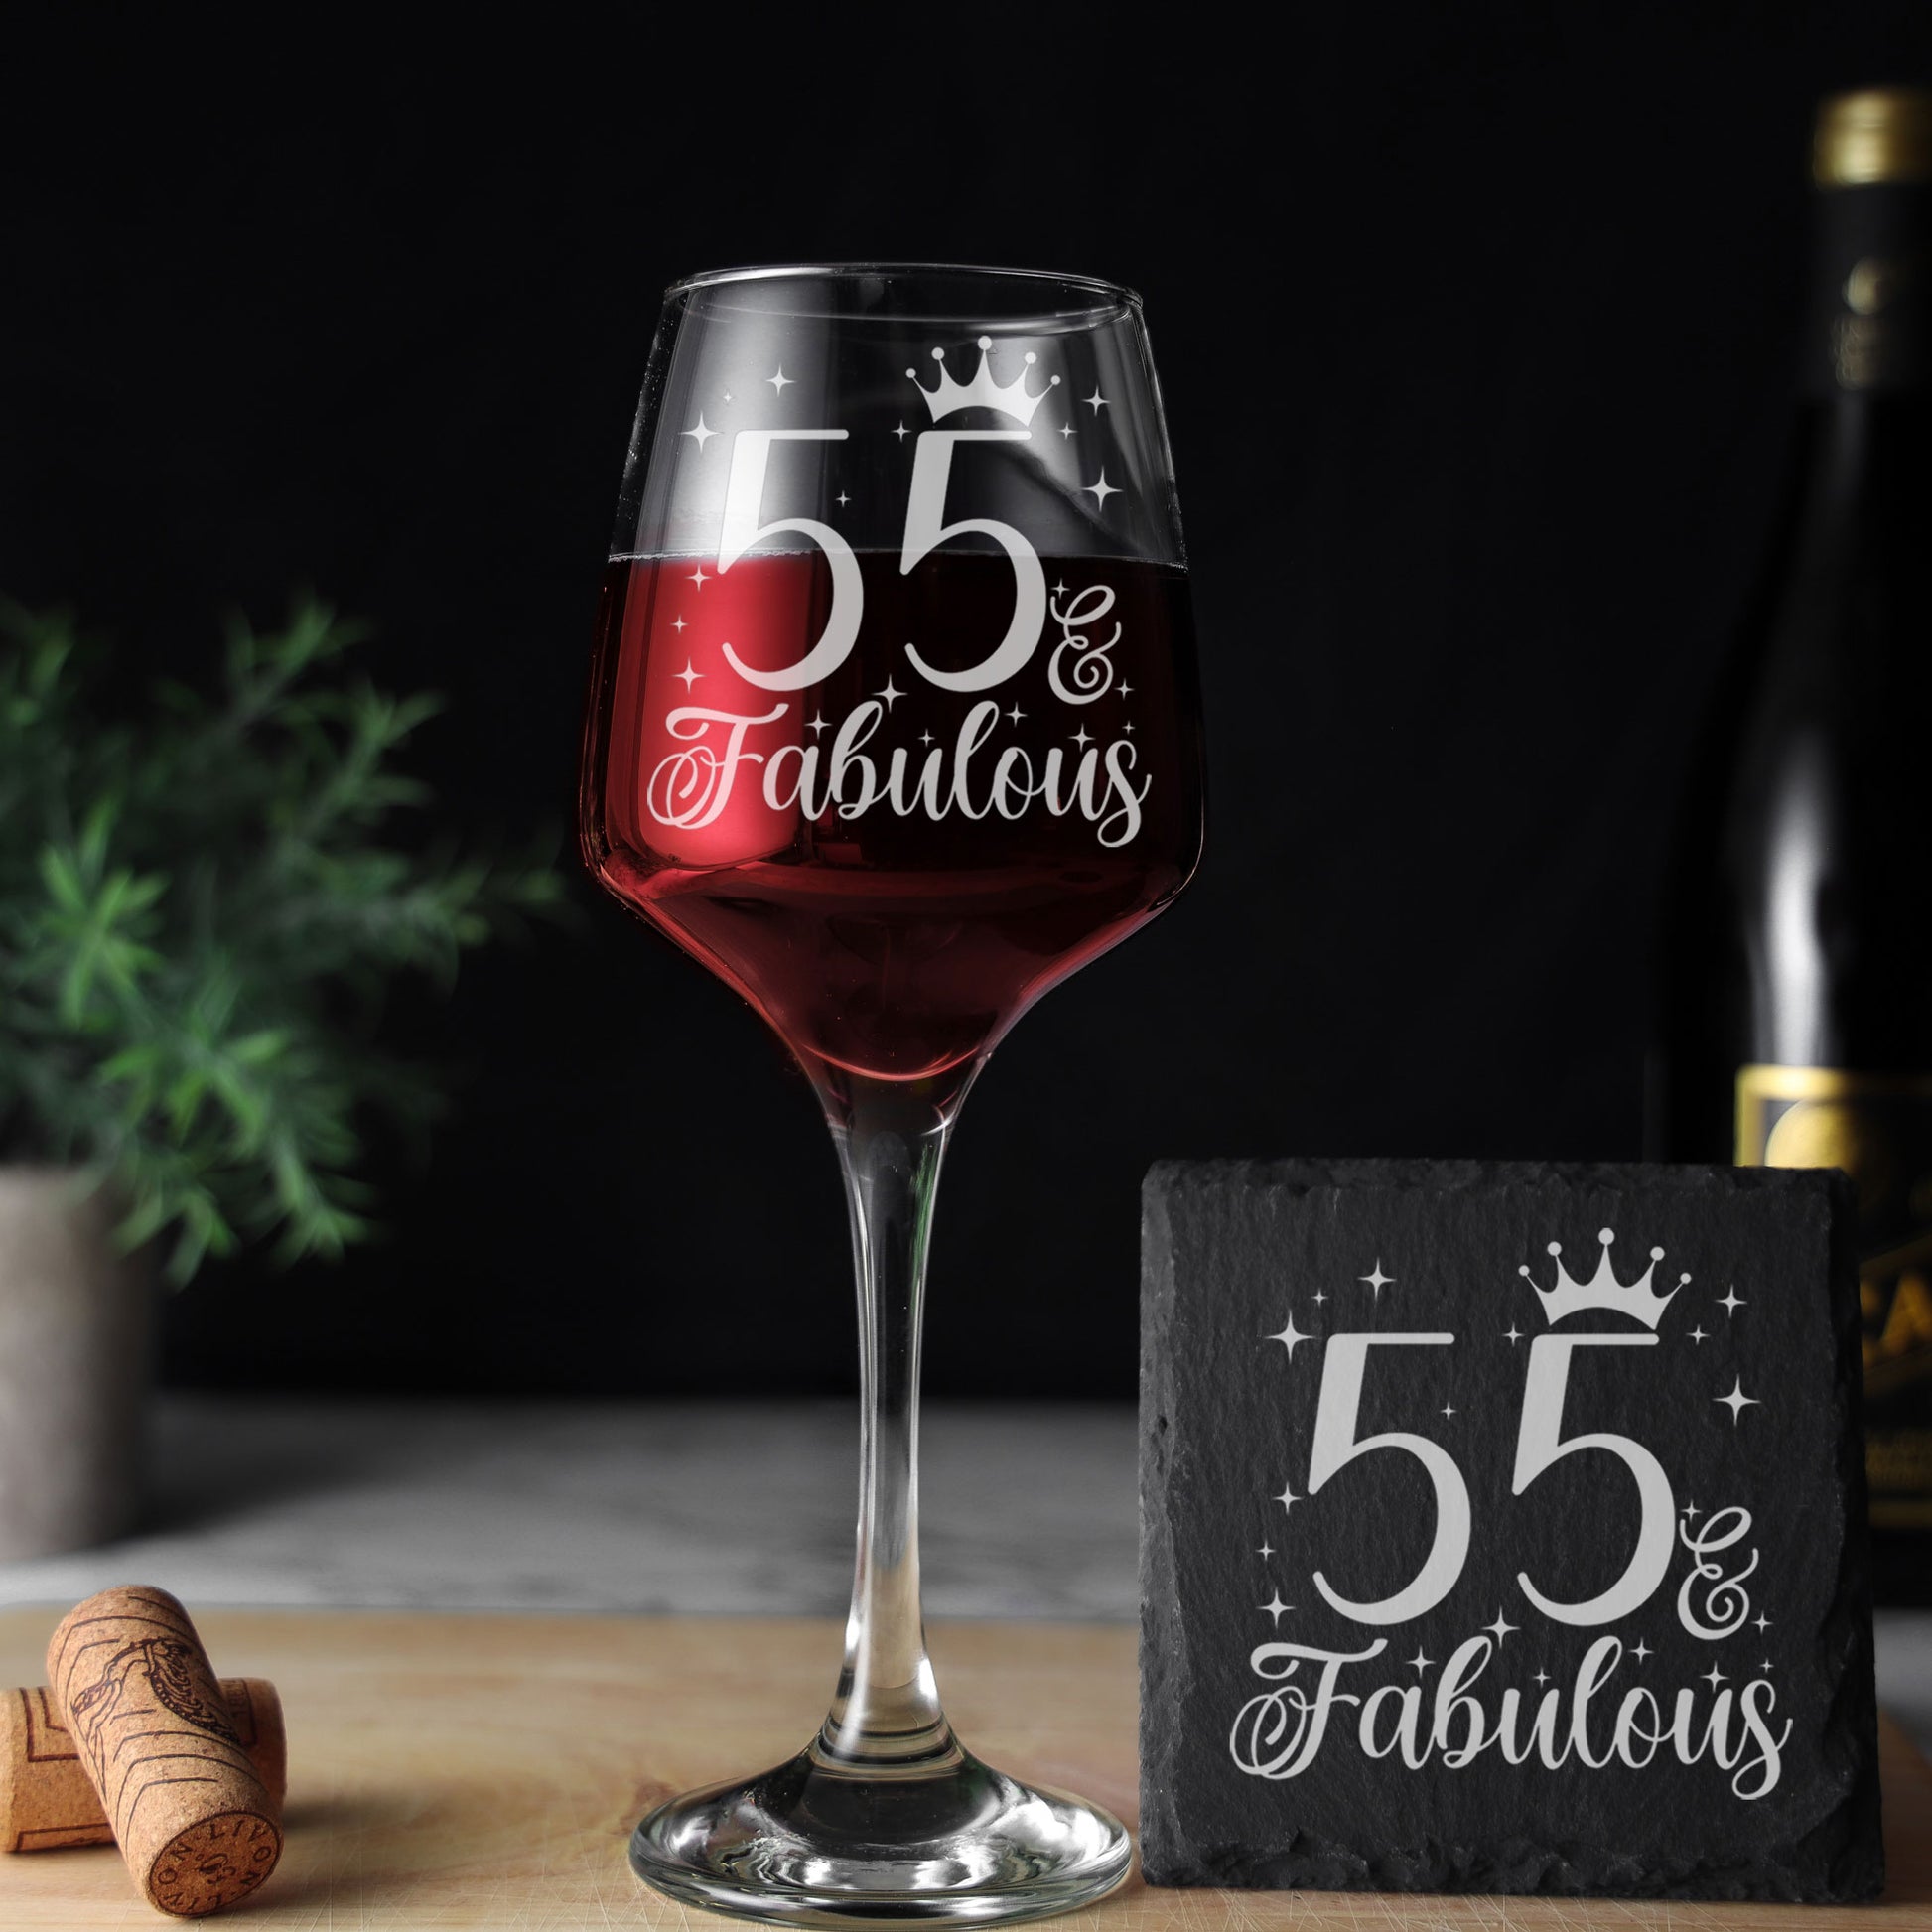 55 & Fabulous 55th Birthday Gift Engraved Wine Glass and/or Coaster Set  - Always Looking Good - Glass & Square Coaster  